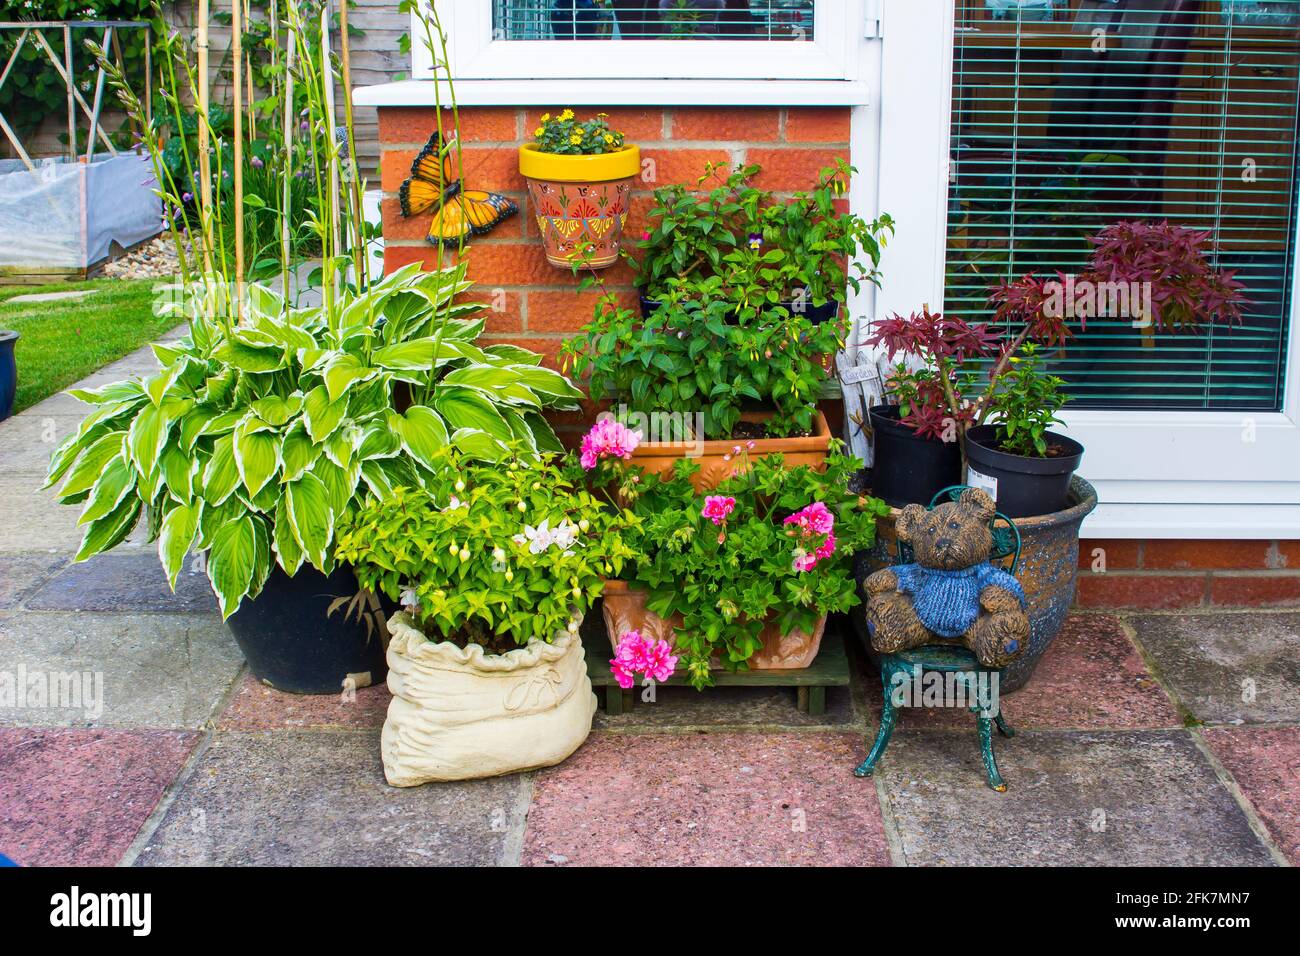 A typical container garden display of herbaceous plants  in a typical English garden in mid June. Stock Photo